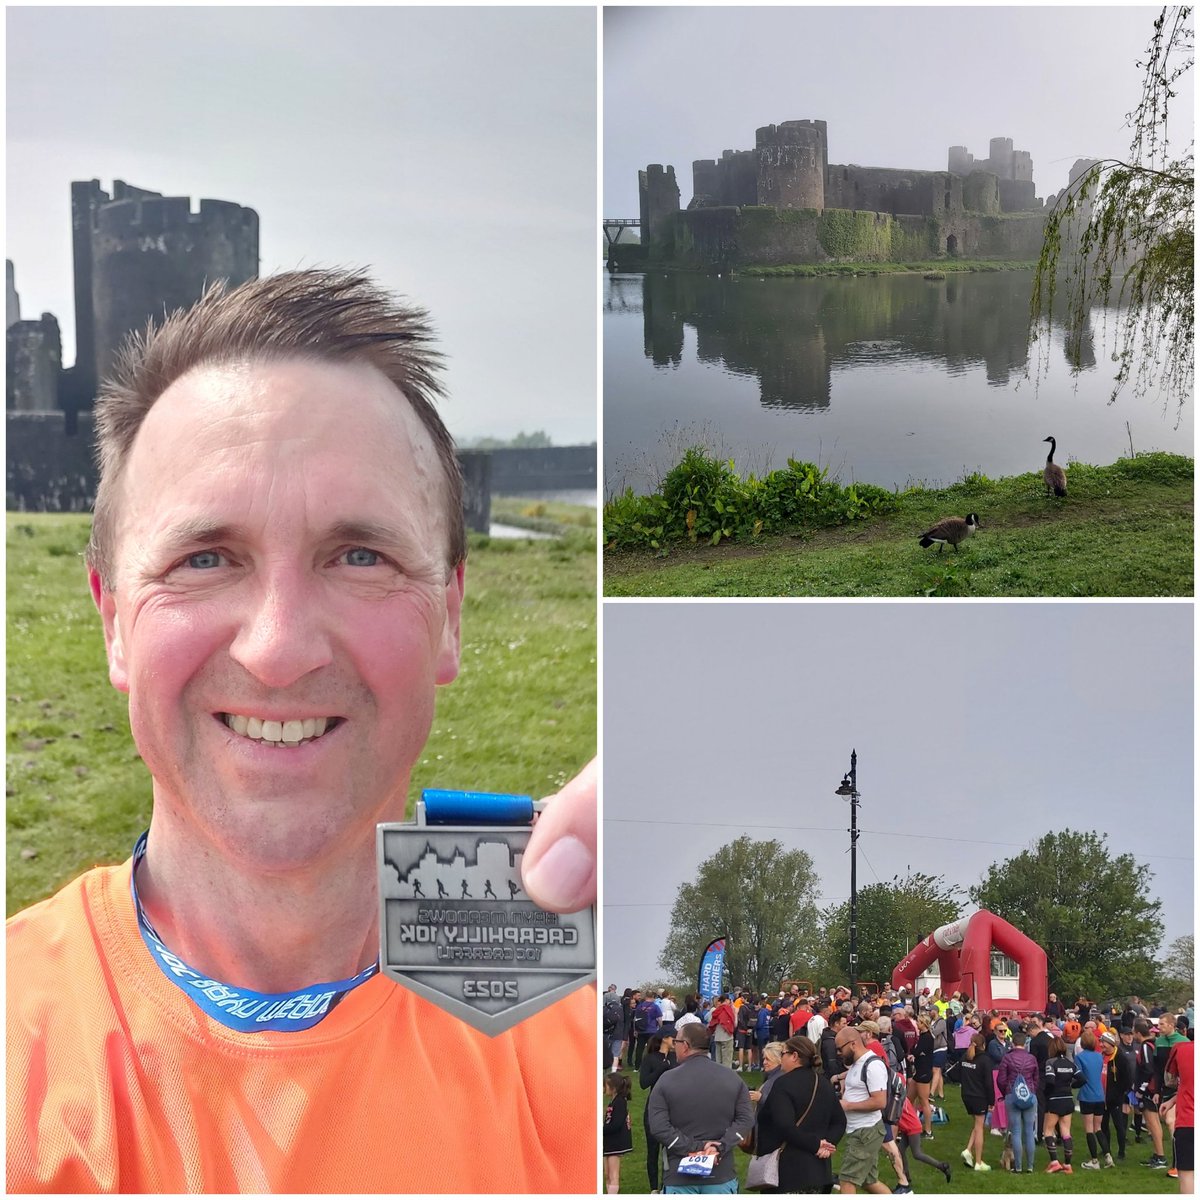 Congratulations everyone who did the #caerphilly10k this morning. Amazing setting and great event 👏👏 #runchat #running